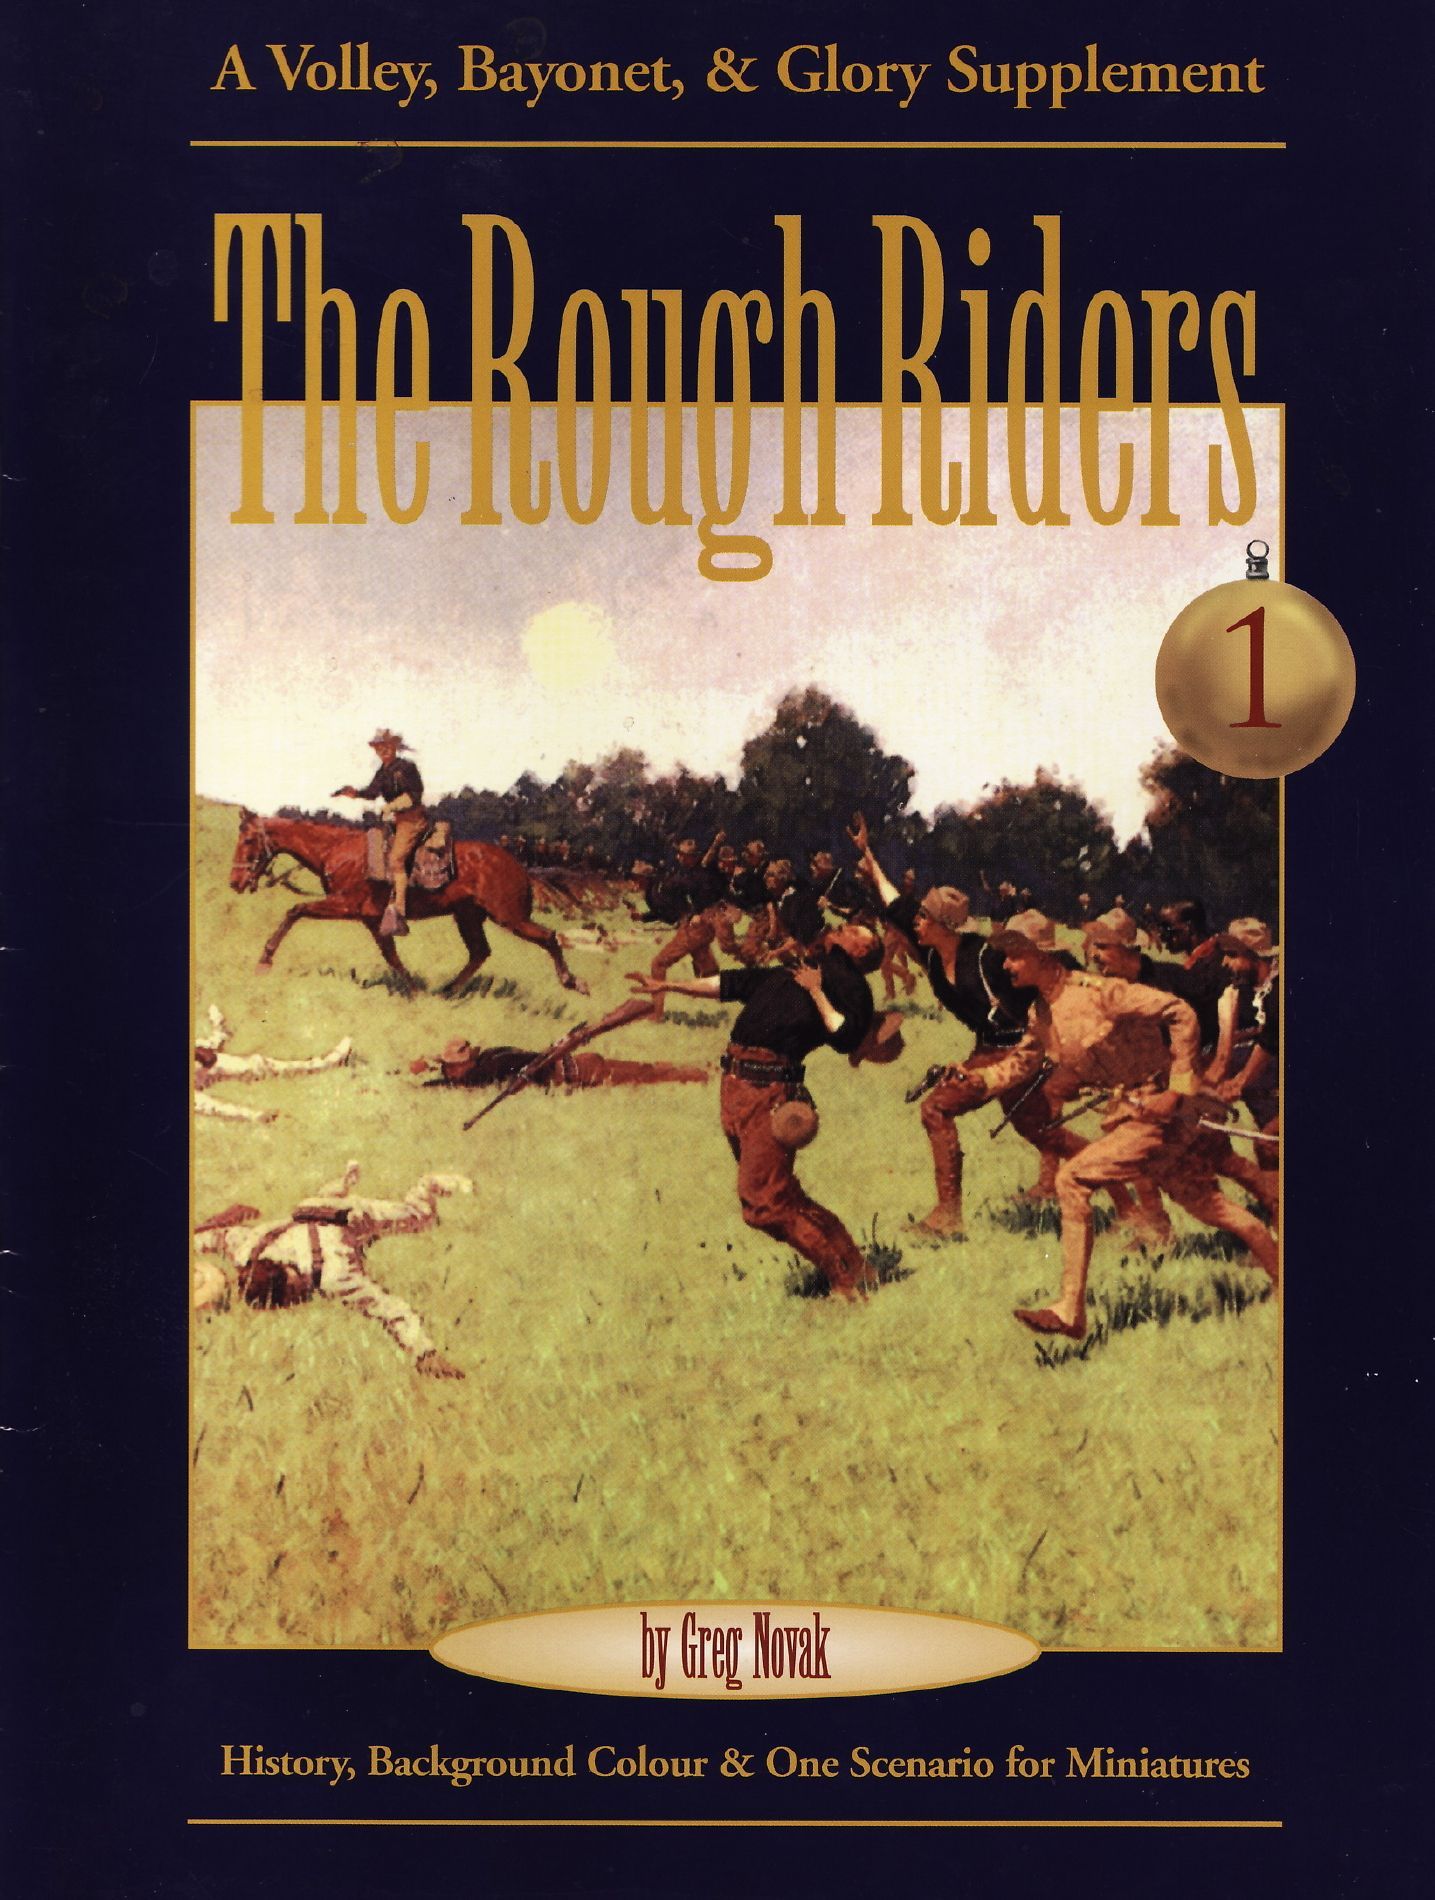 The Rough Riders: A Volley, Bayonet, & Glory Supplement, volume 1